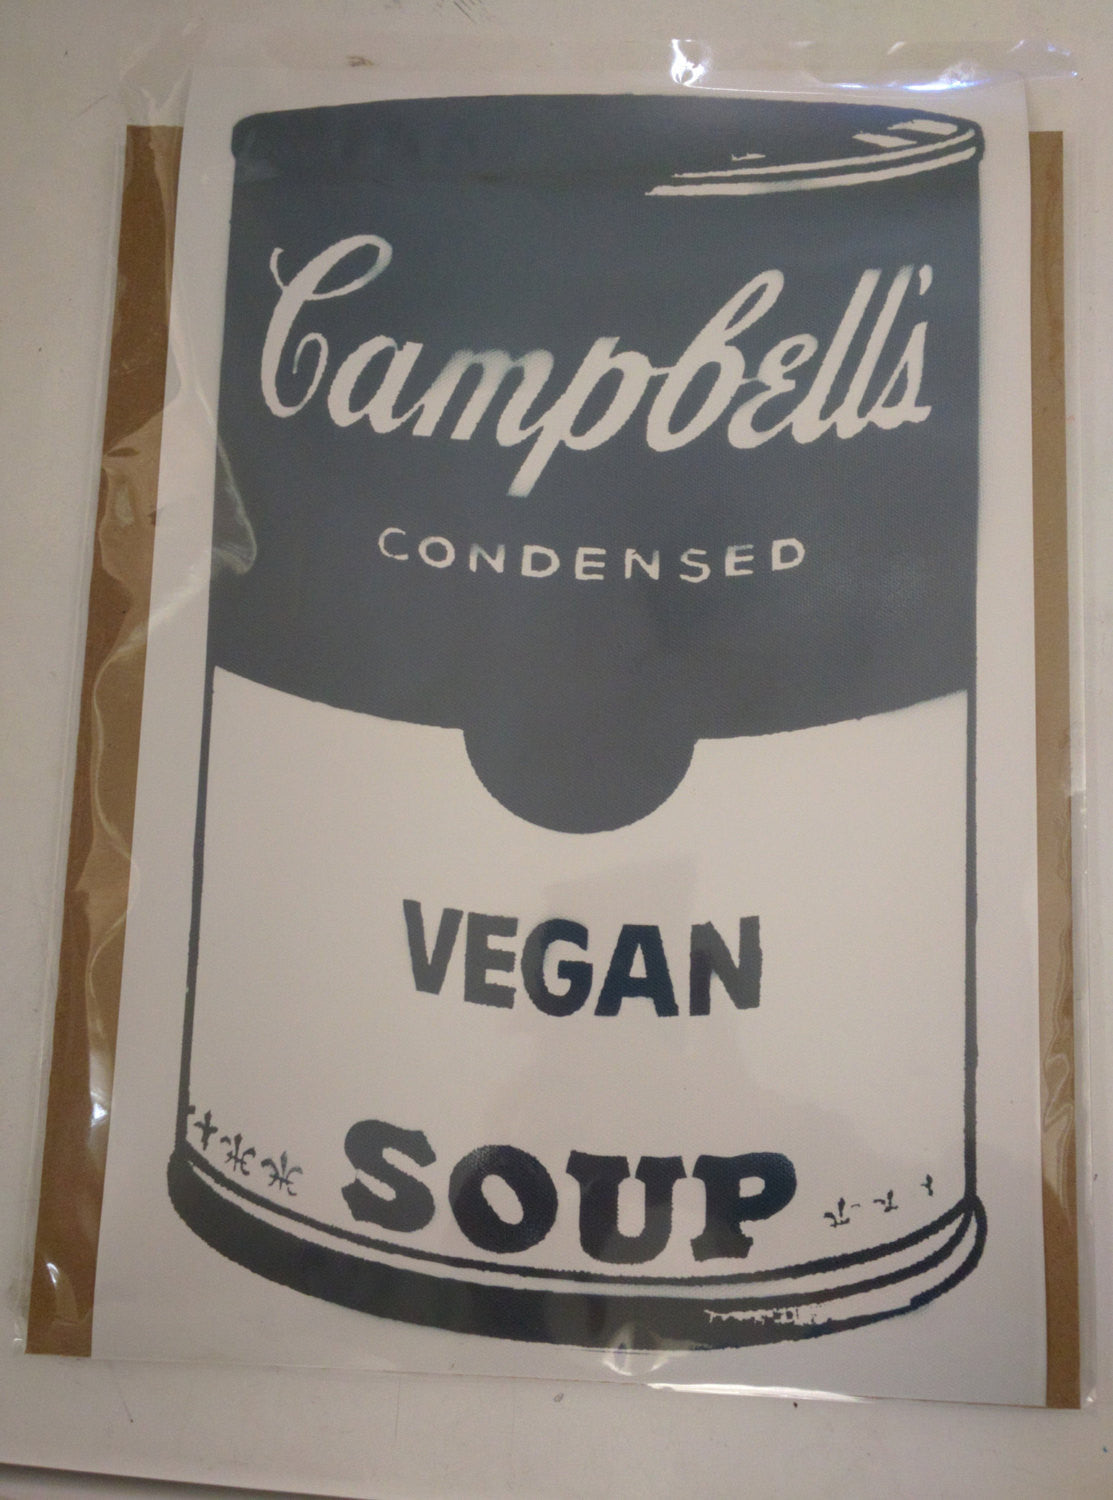 Limited Edition Print of Blue Campbell's Vegan Soup Signed L3f0u